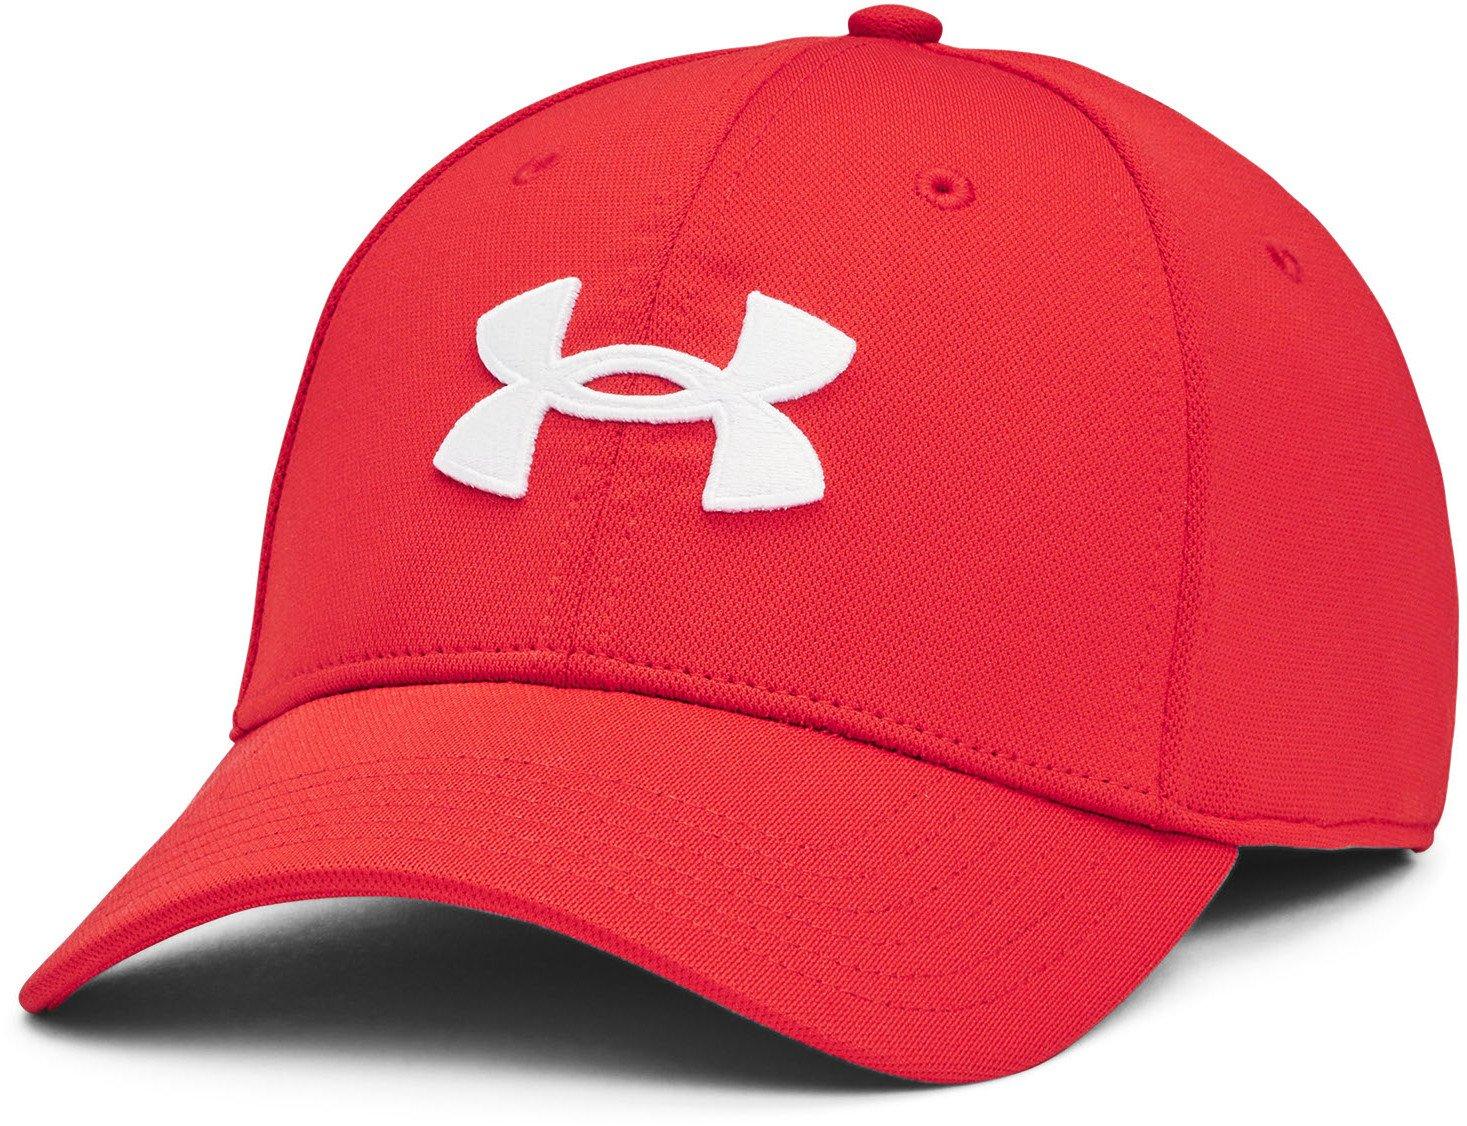 Under Armour Blitzing-RED M/L